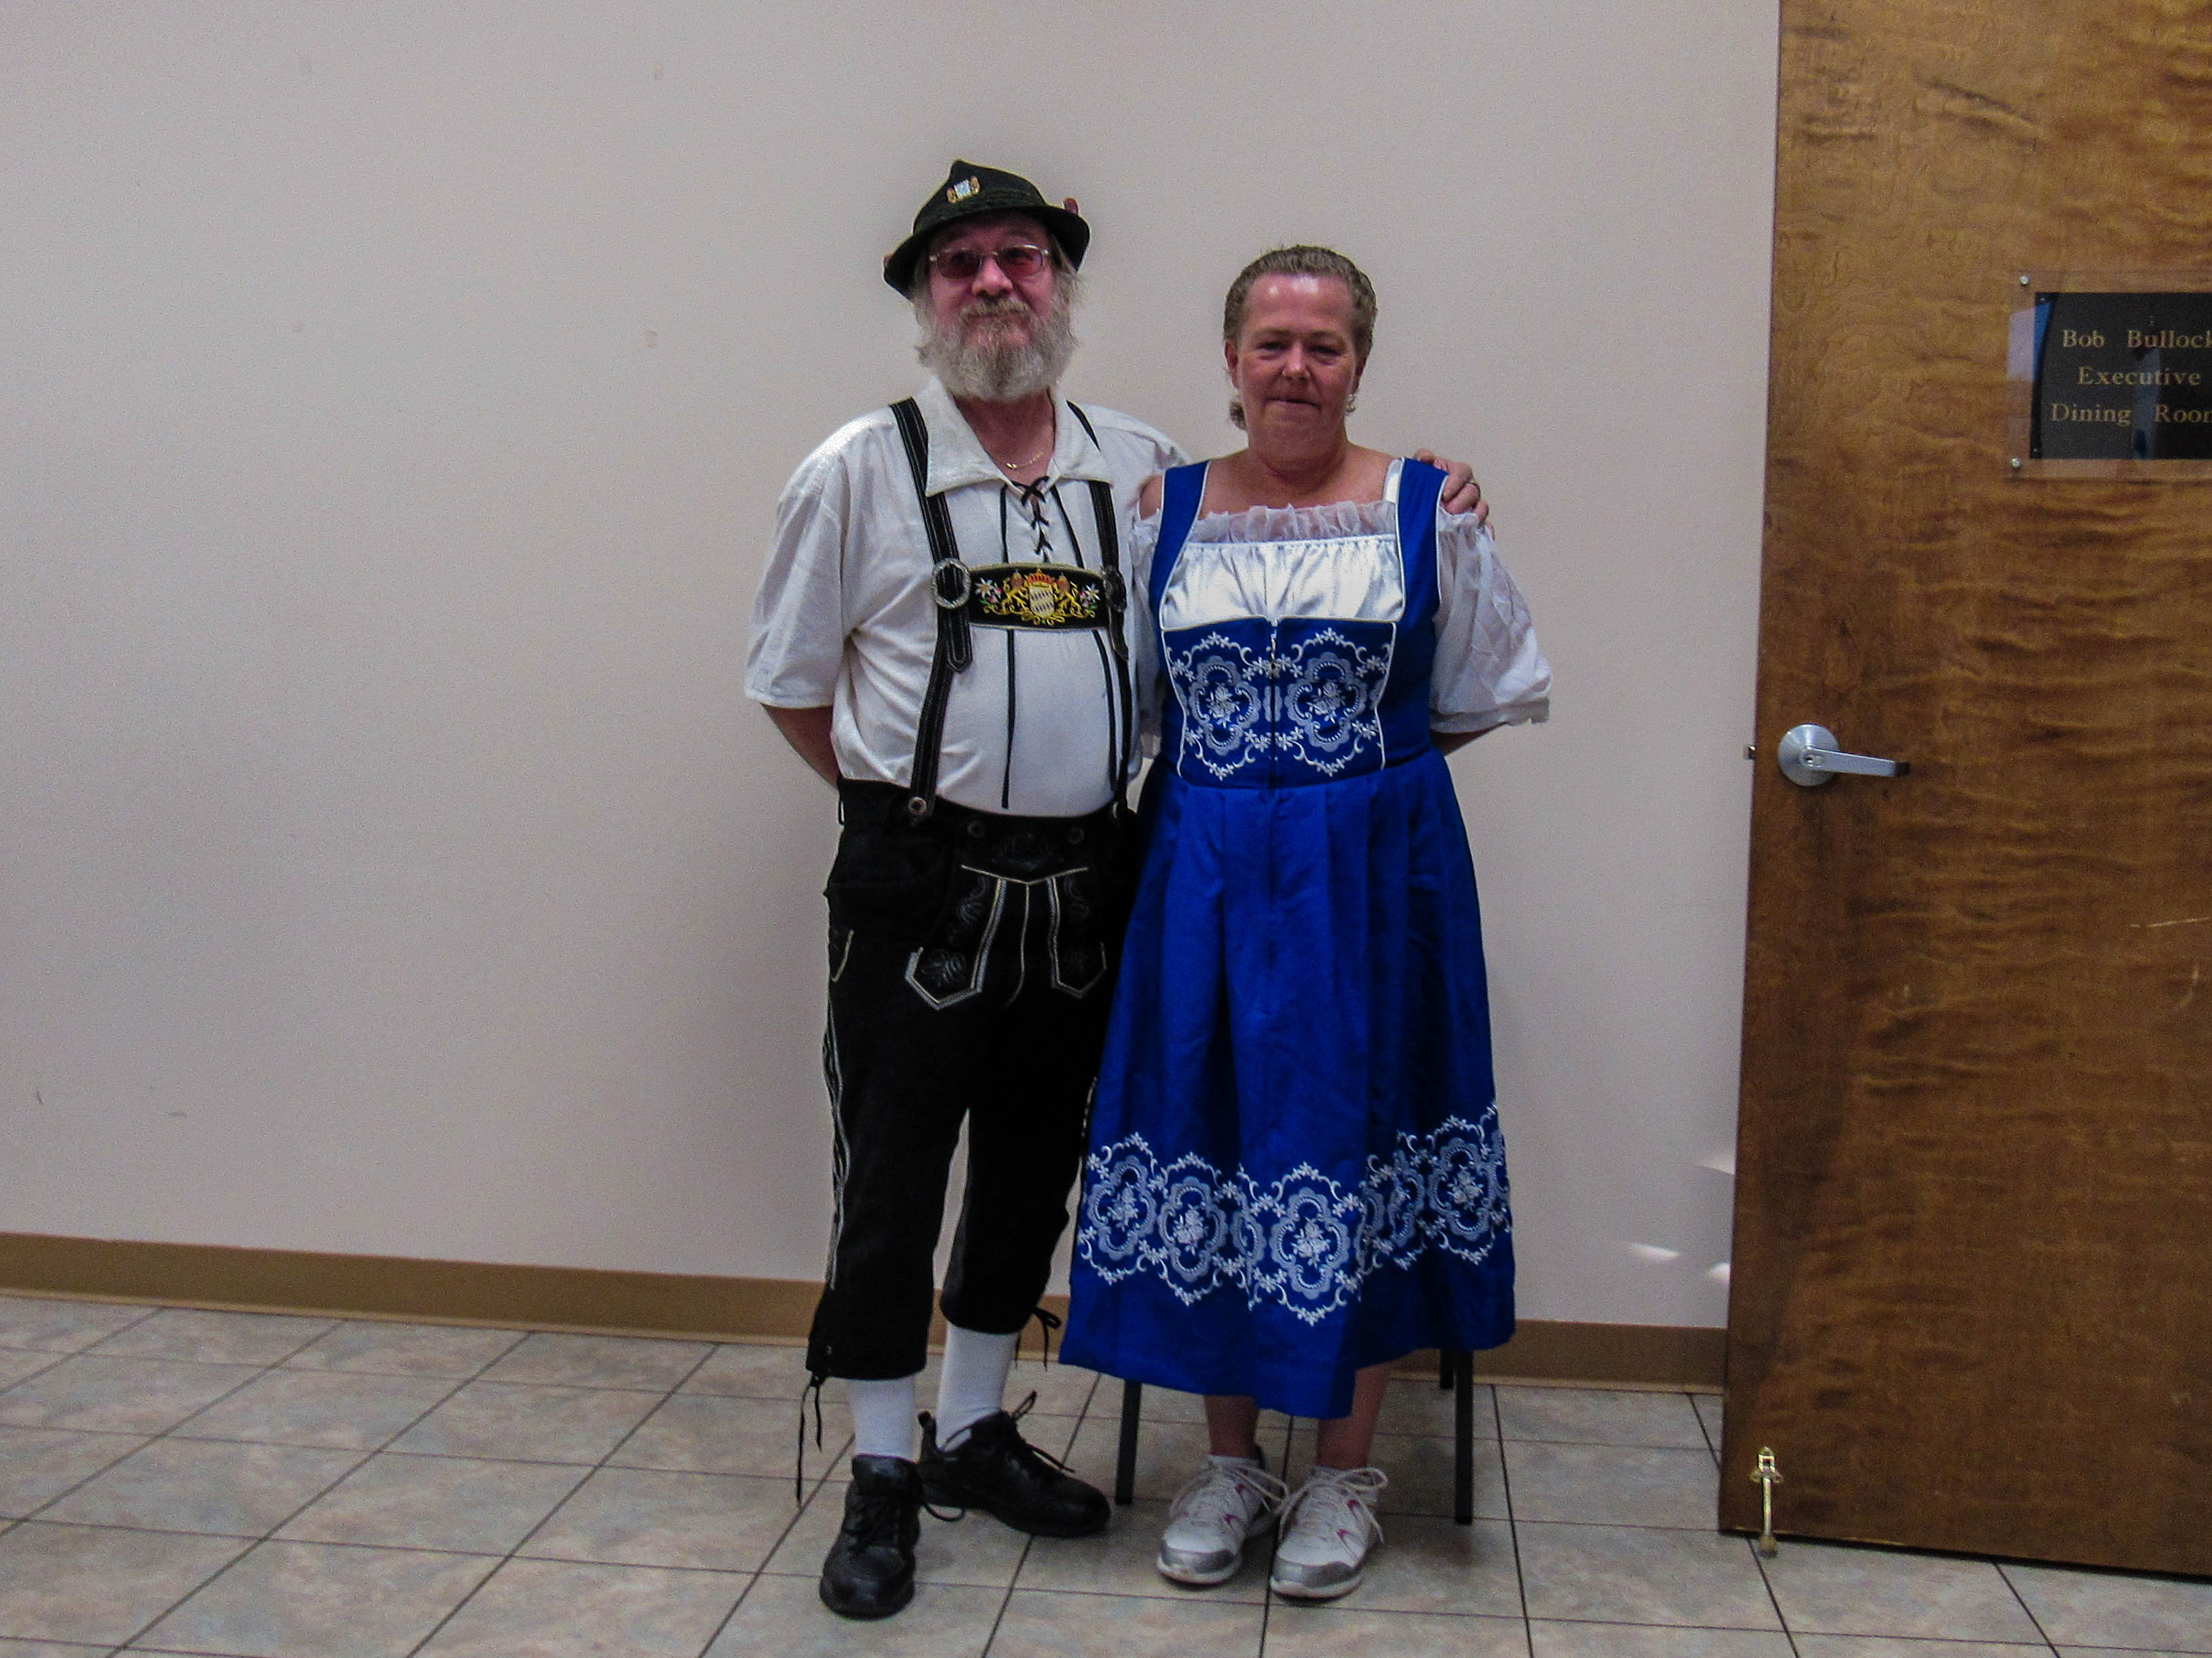 Jim and Amy Anderau, both from Waco, showed up determined to win the Holloween Costume Contest.